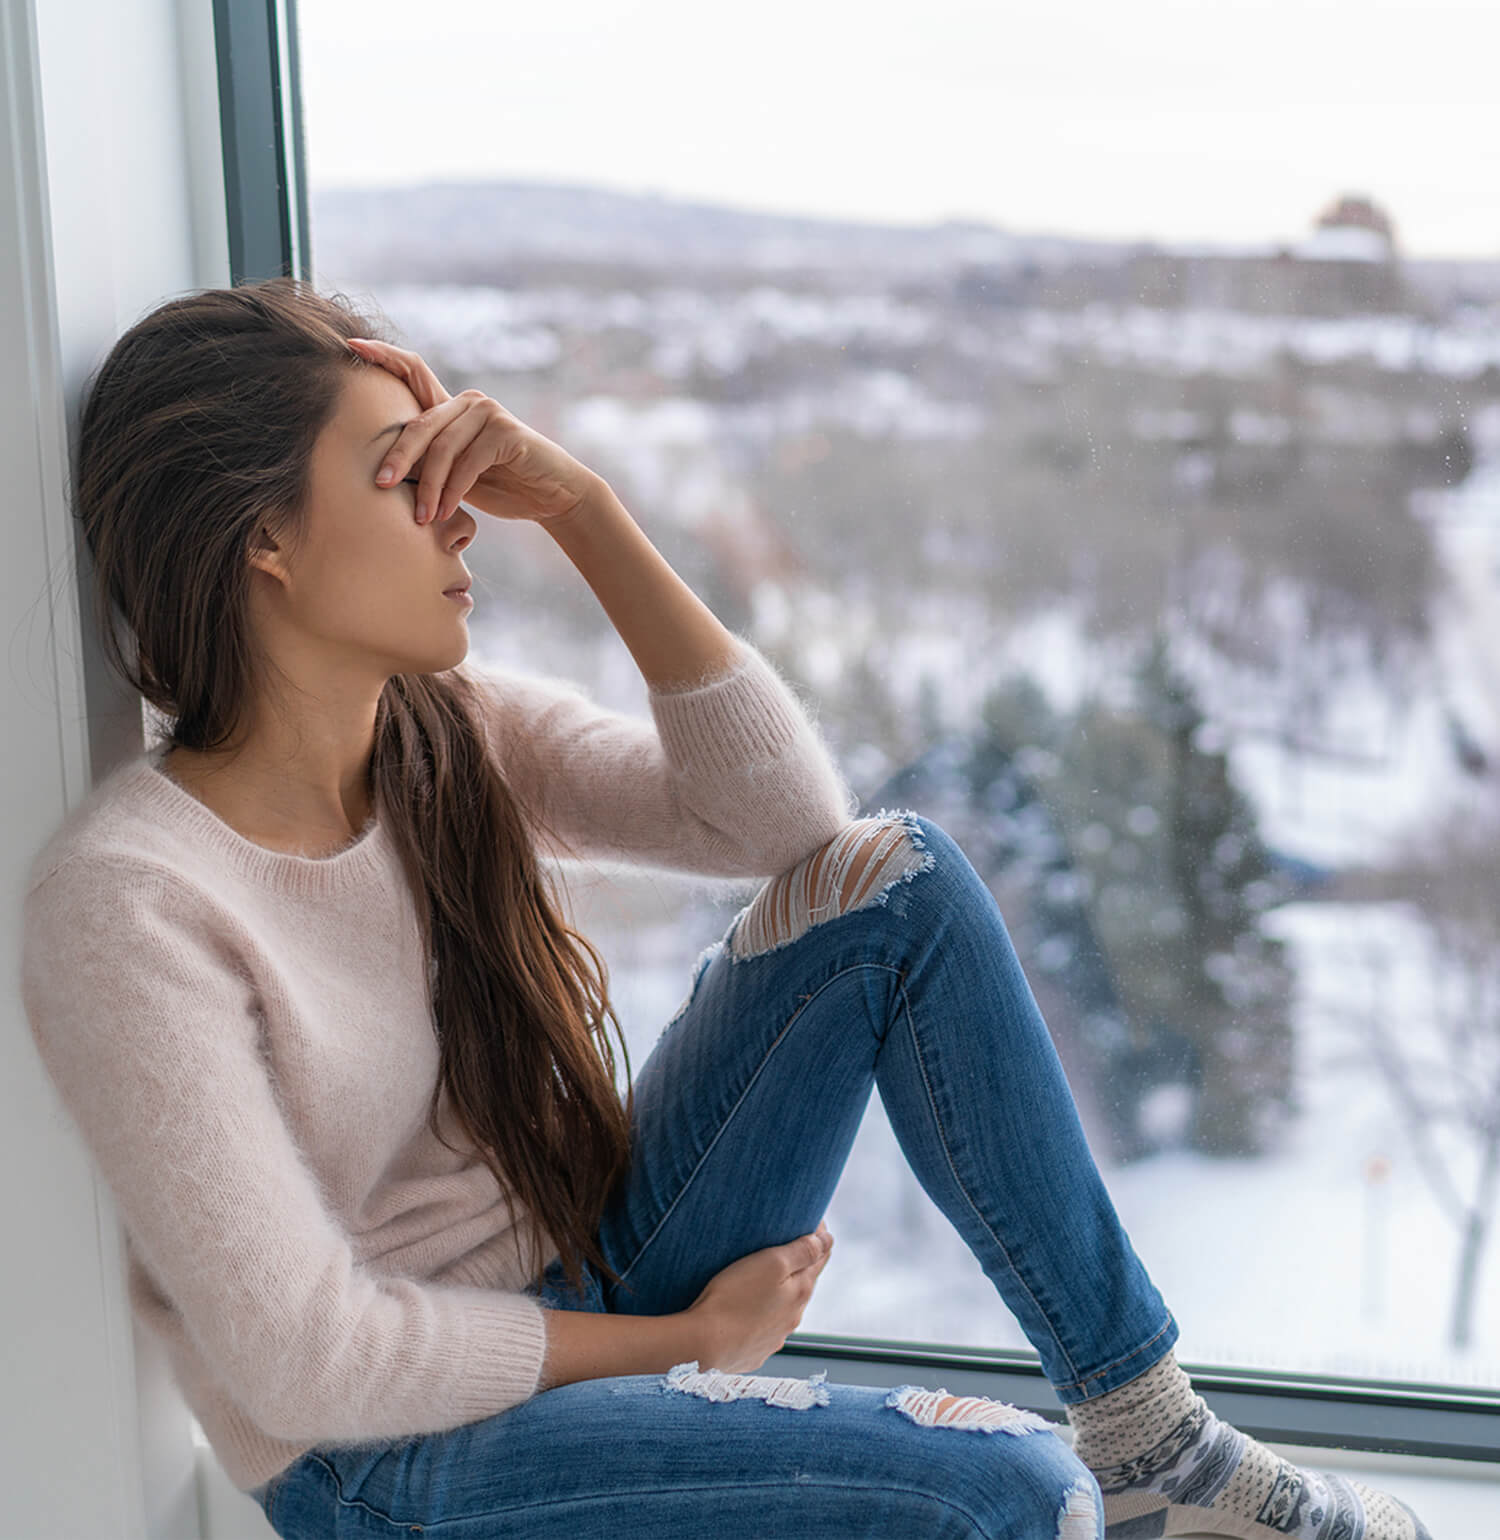 Woman sitting in window with hand over eyes. Dealing with separation anxiety, GAD, social anxiety, or any type is challenging. If it is affecting your day to day flow, talk with an anxiety therapist who uses psychotherapy to help. Call now and begin anxiety treatment in Torrance, CA and surrounding areas soon!